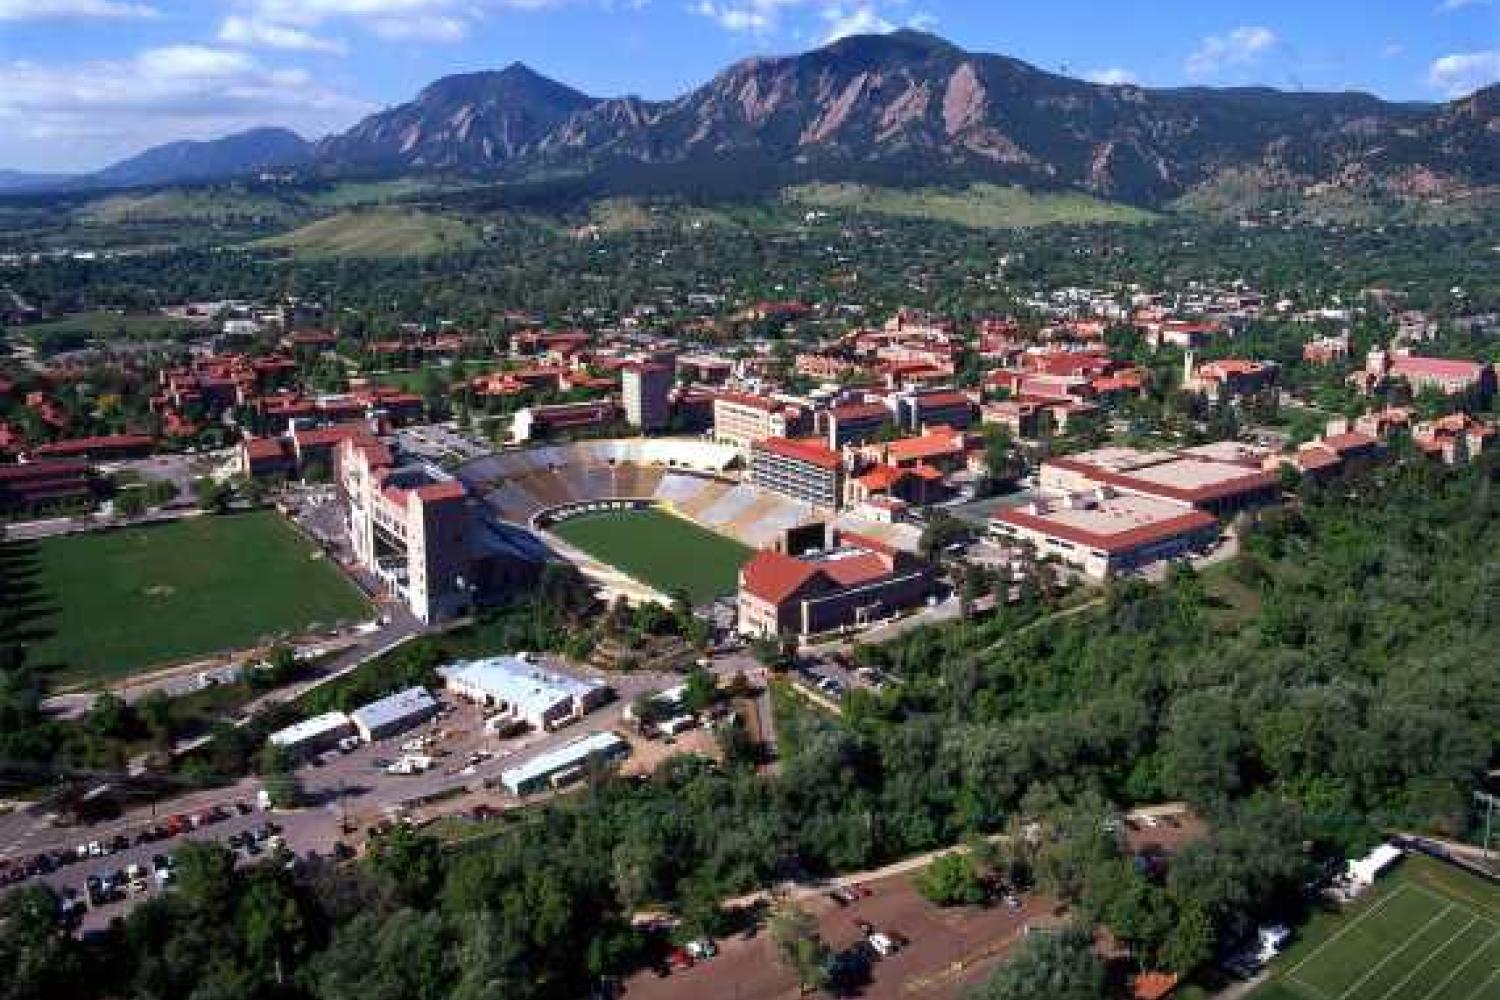 The University of Colorado is consistently voted one of the most beautiful campuses in the nation.